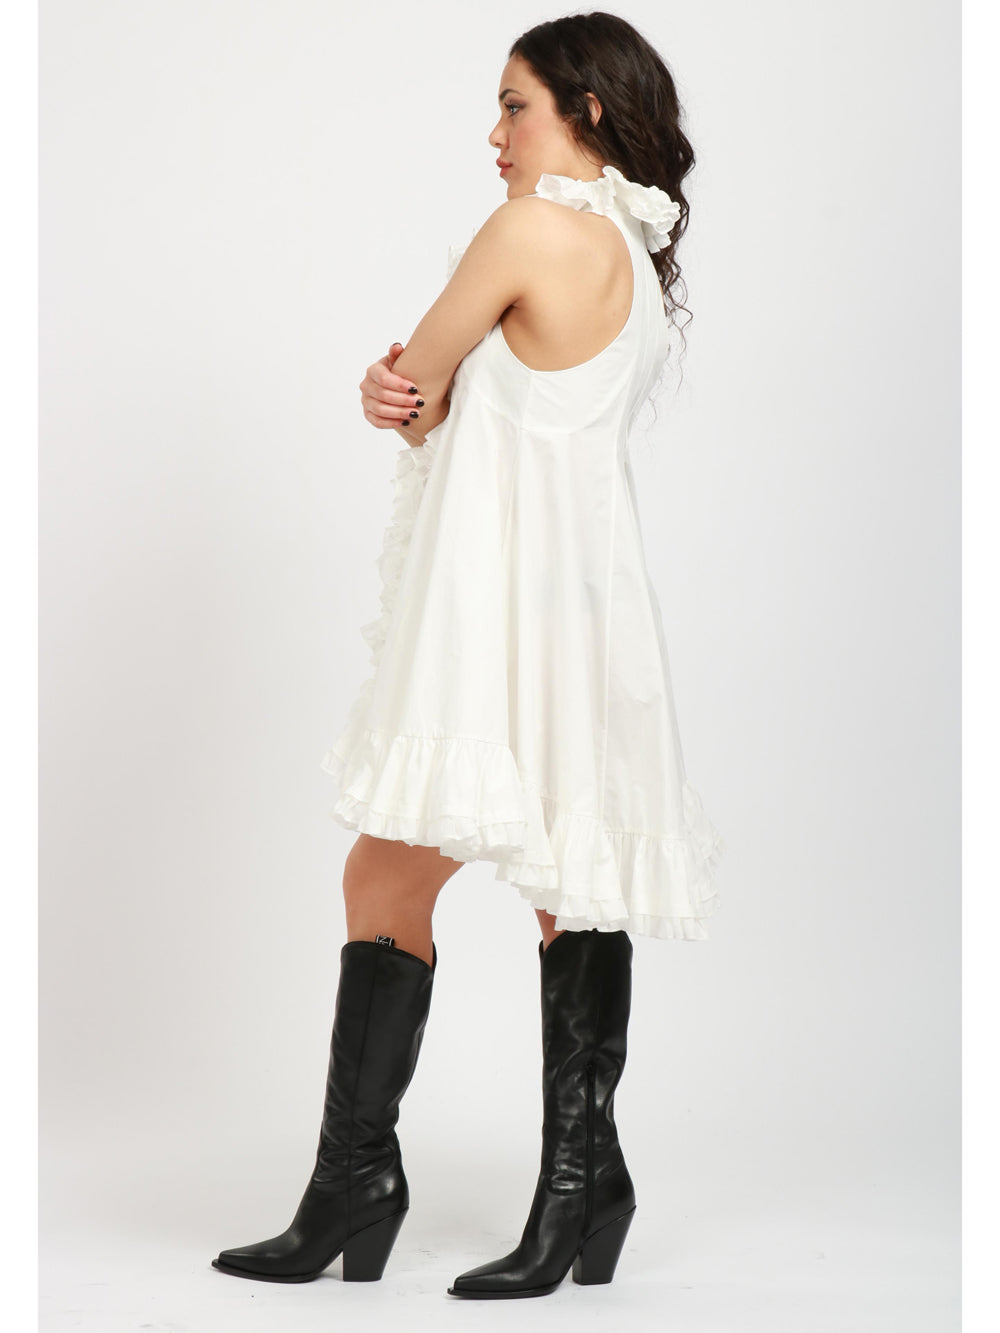 White Cotton Vest Dress with Ruffles and Ruffles